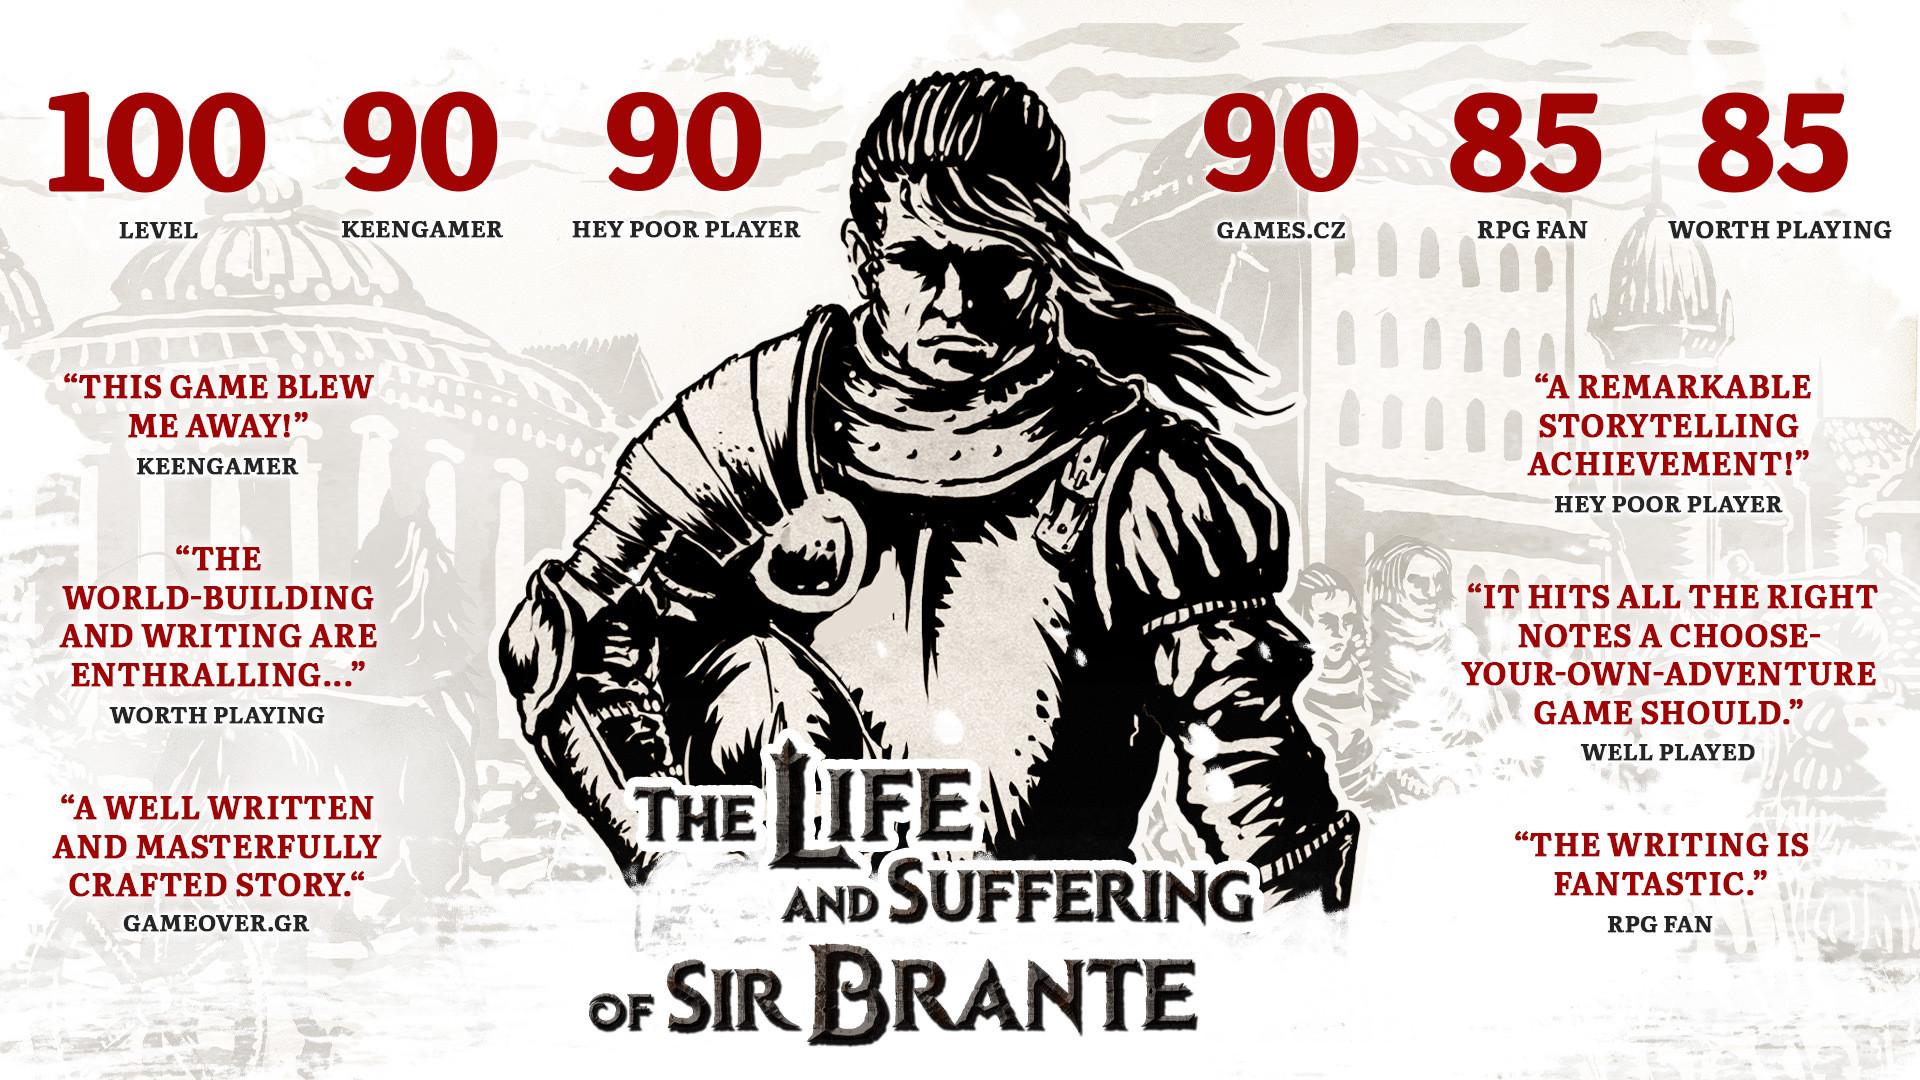 Screenshot №1 from game The Life and Suffering of Sir Brante